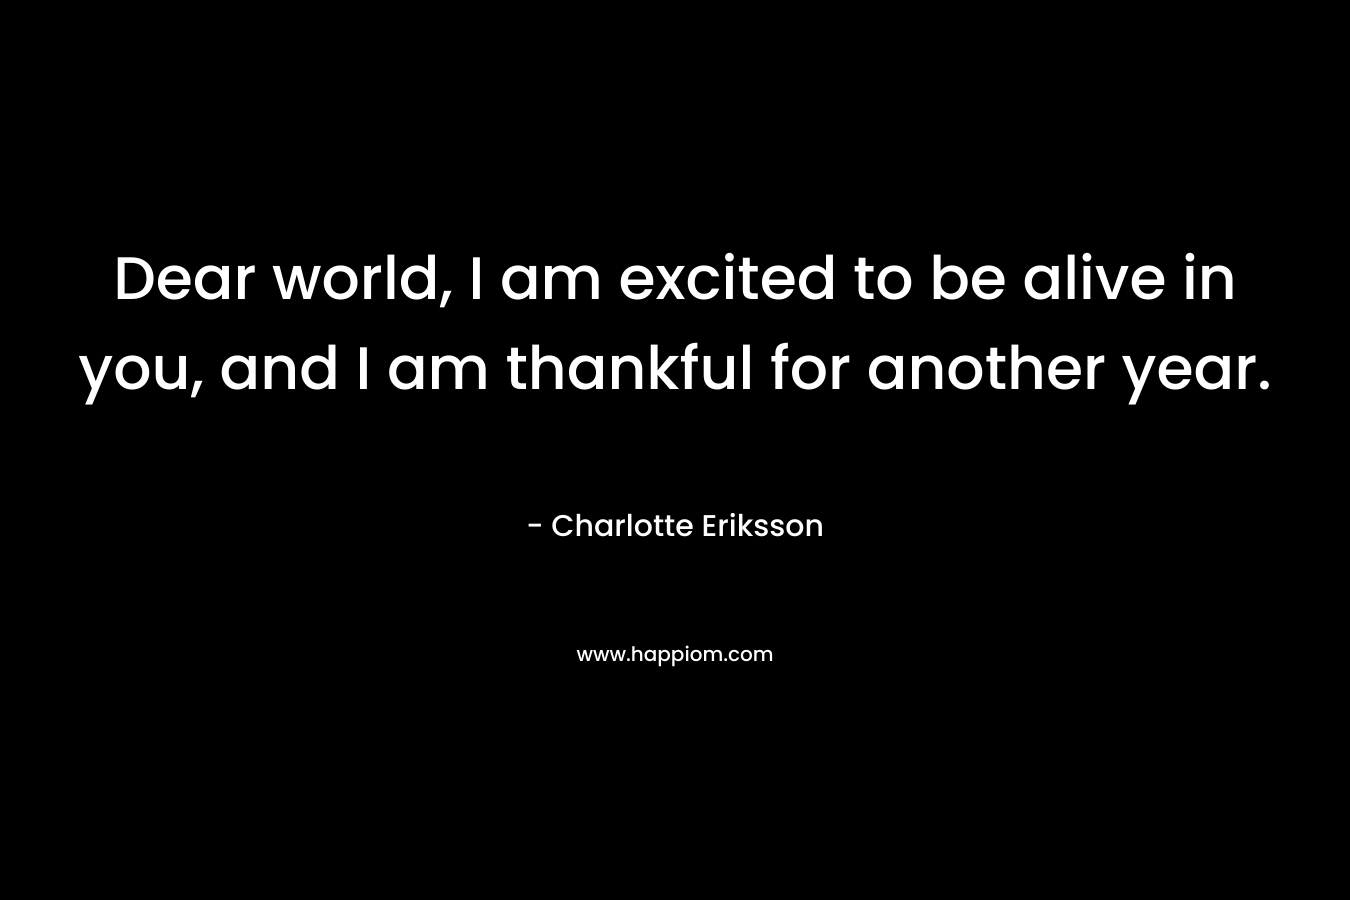 Dear world, I am excited to be alive in you, and I am thankful for another year.